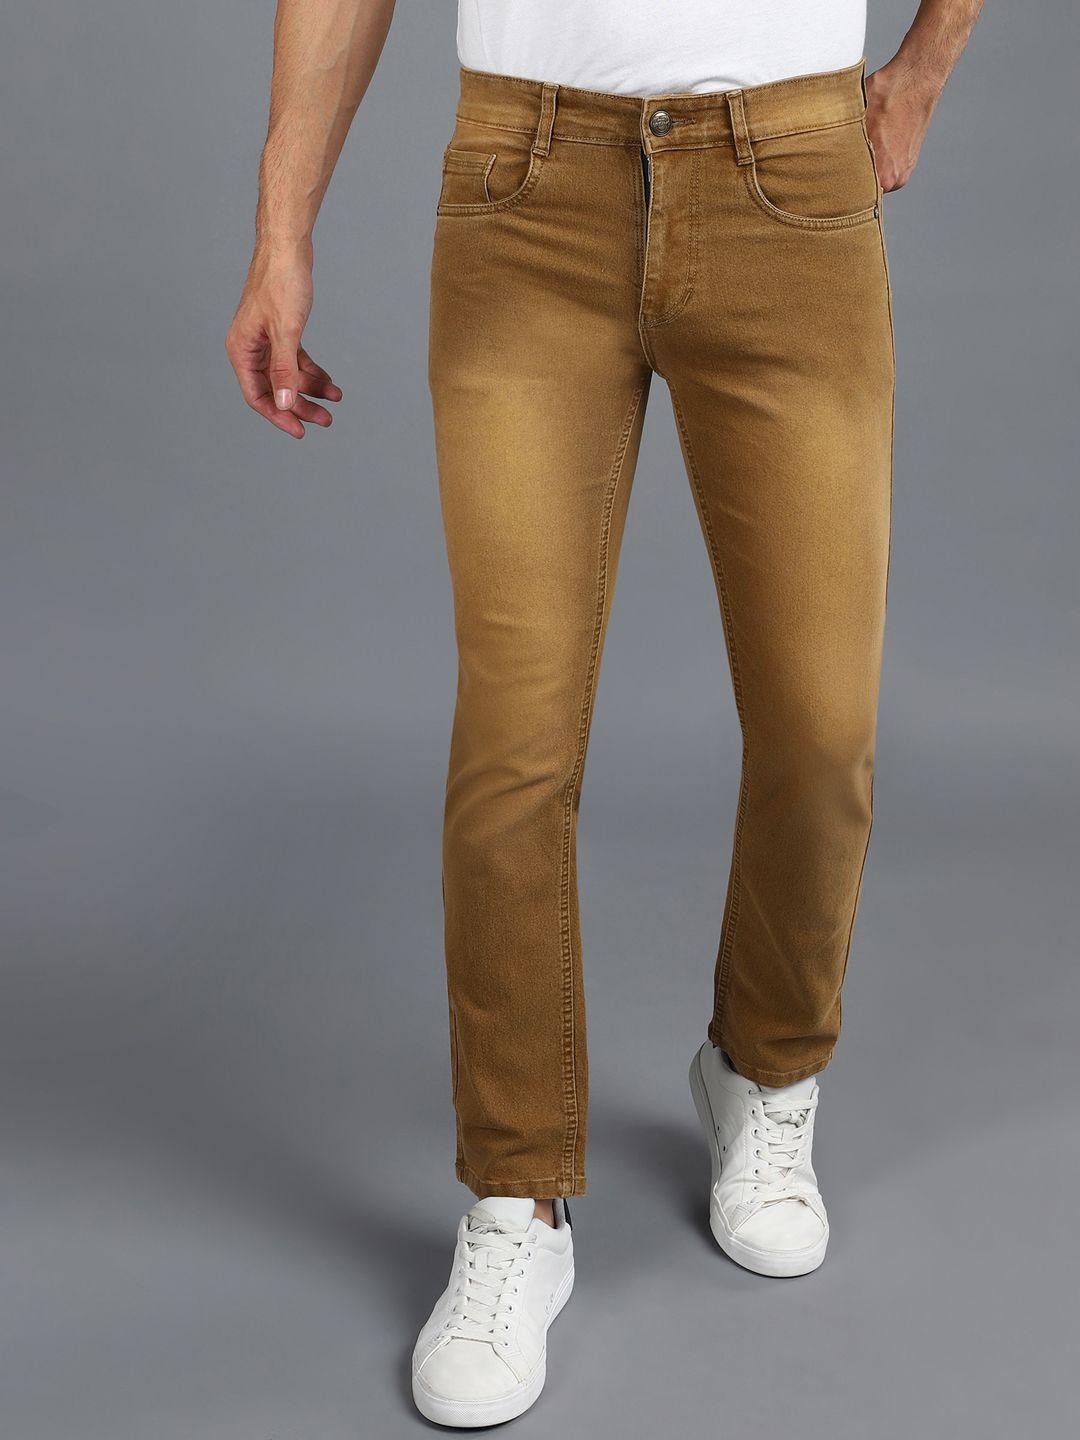 urbano-fashion-men-regular-fit-light-fade-clean-look-stretchable-jeans